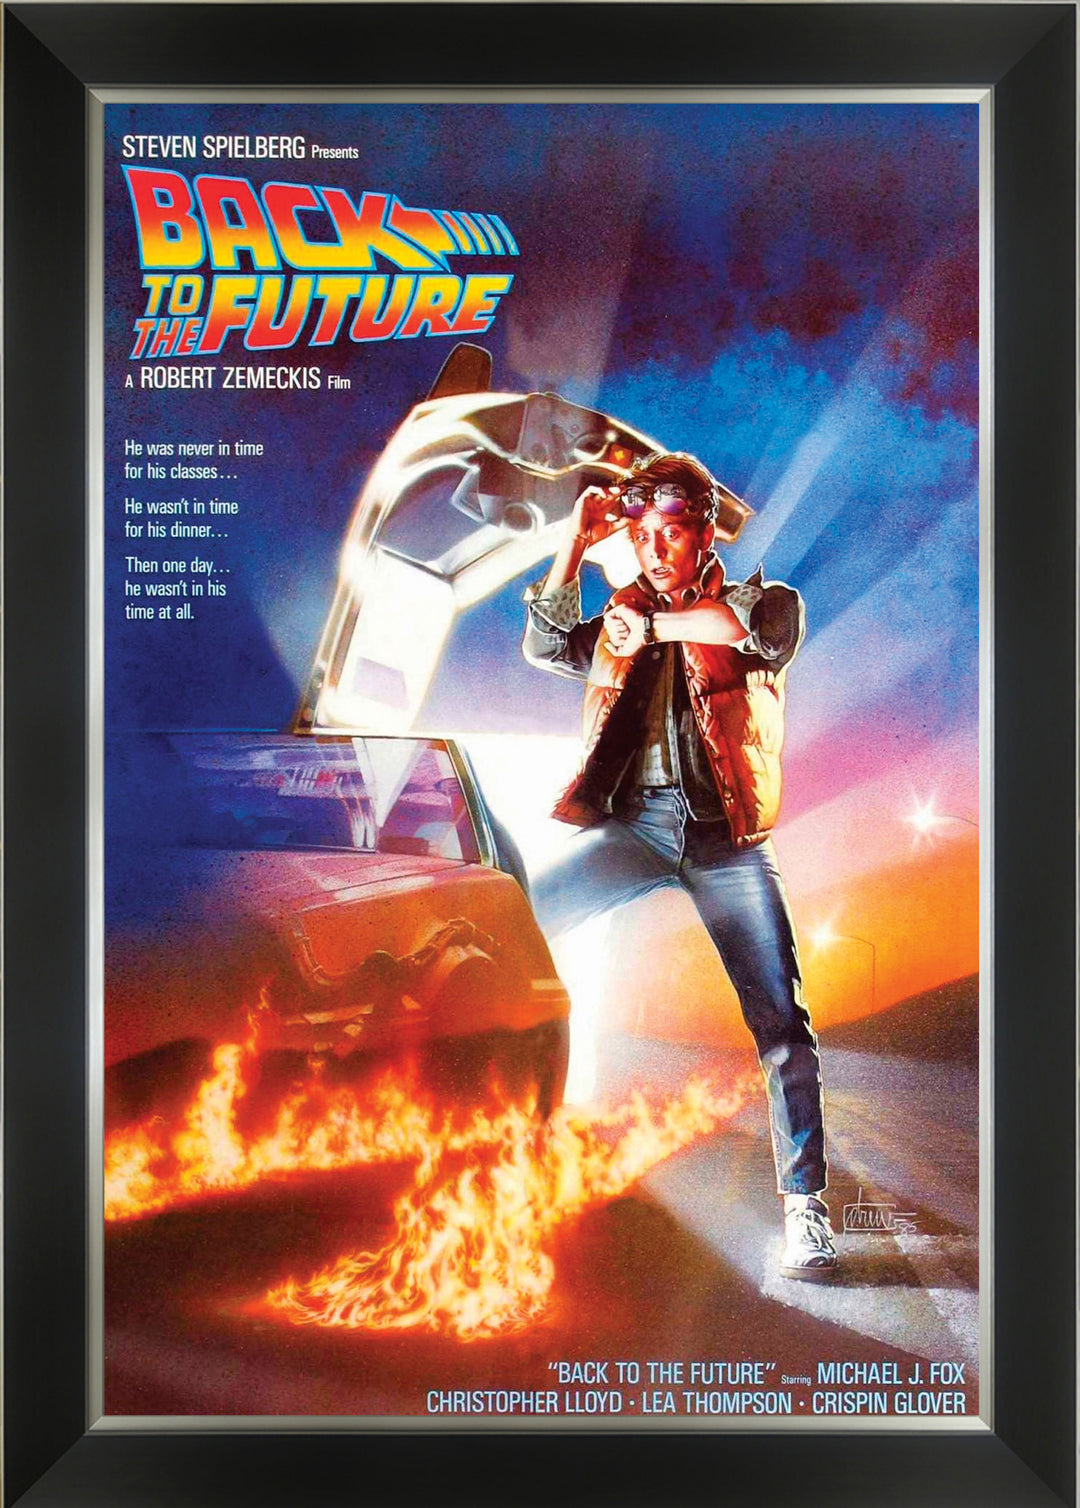 Back To The Future - Framed Classic Movie Poster Reprint, Contemporary Art, Pop Culture Art, Movies, Collectibile Memorabilia, AAAPM32509